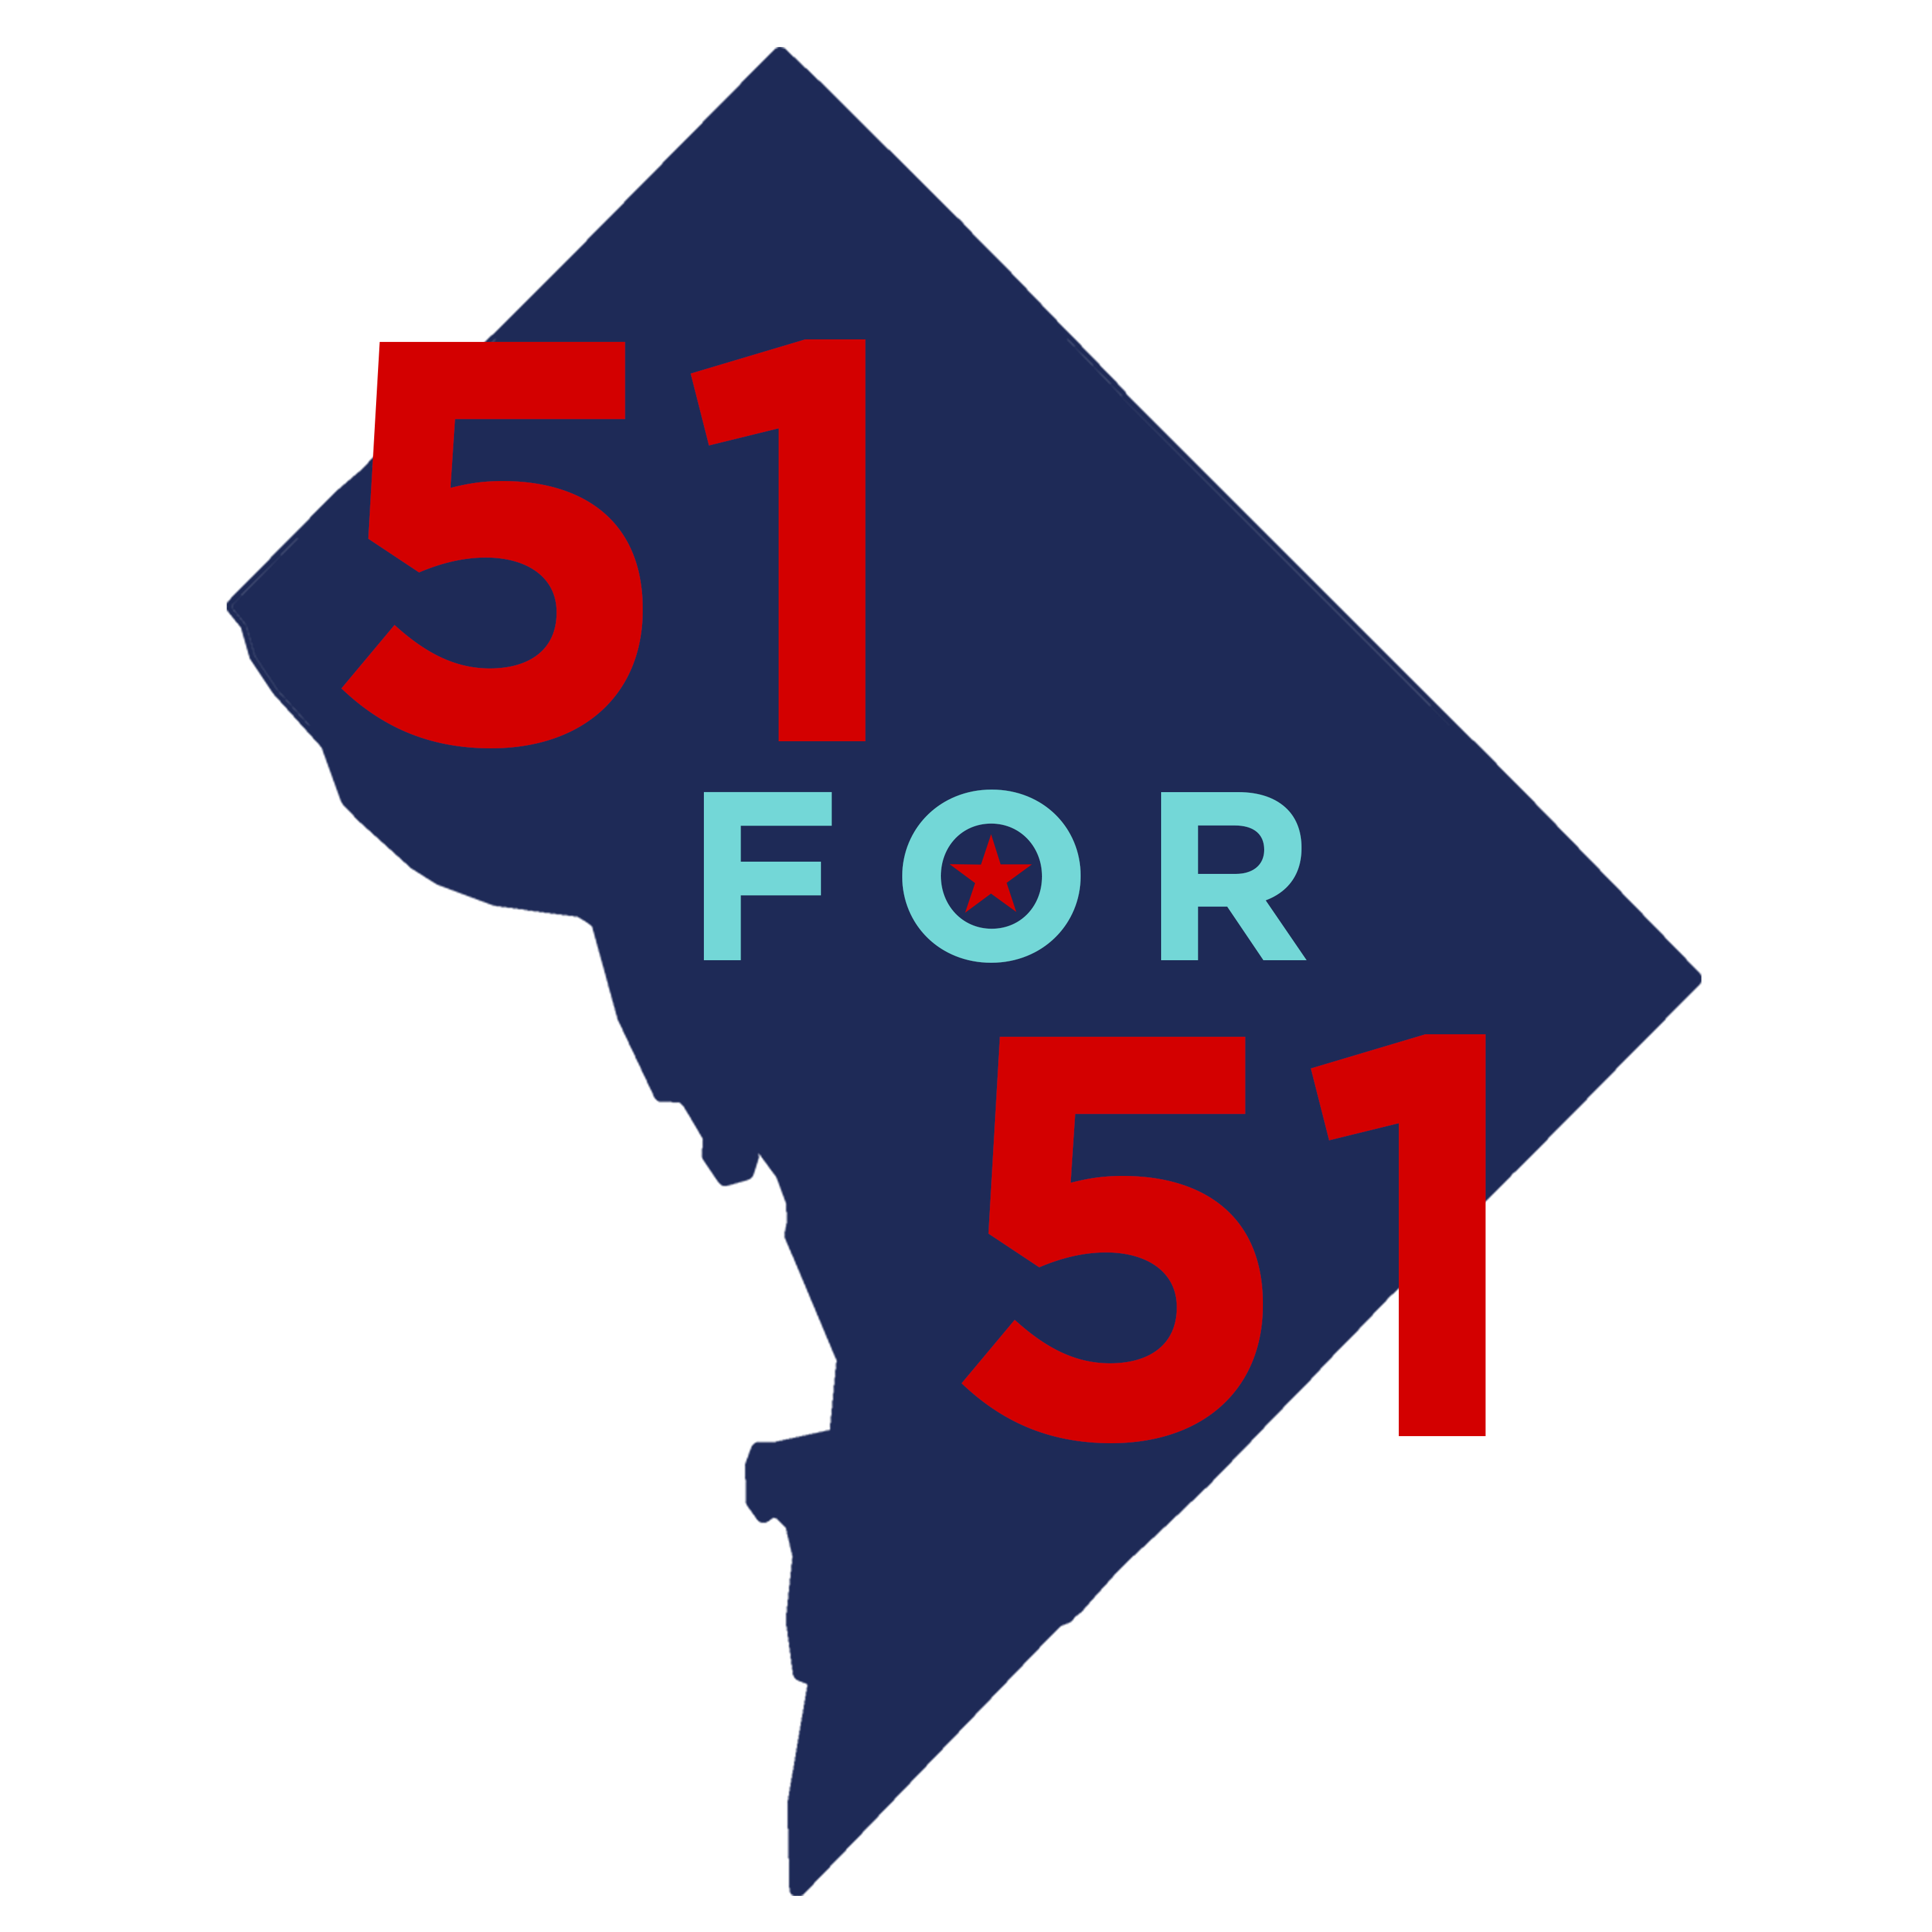 51 for 51_Final Logo.png